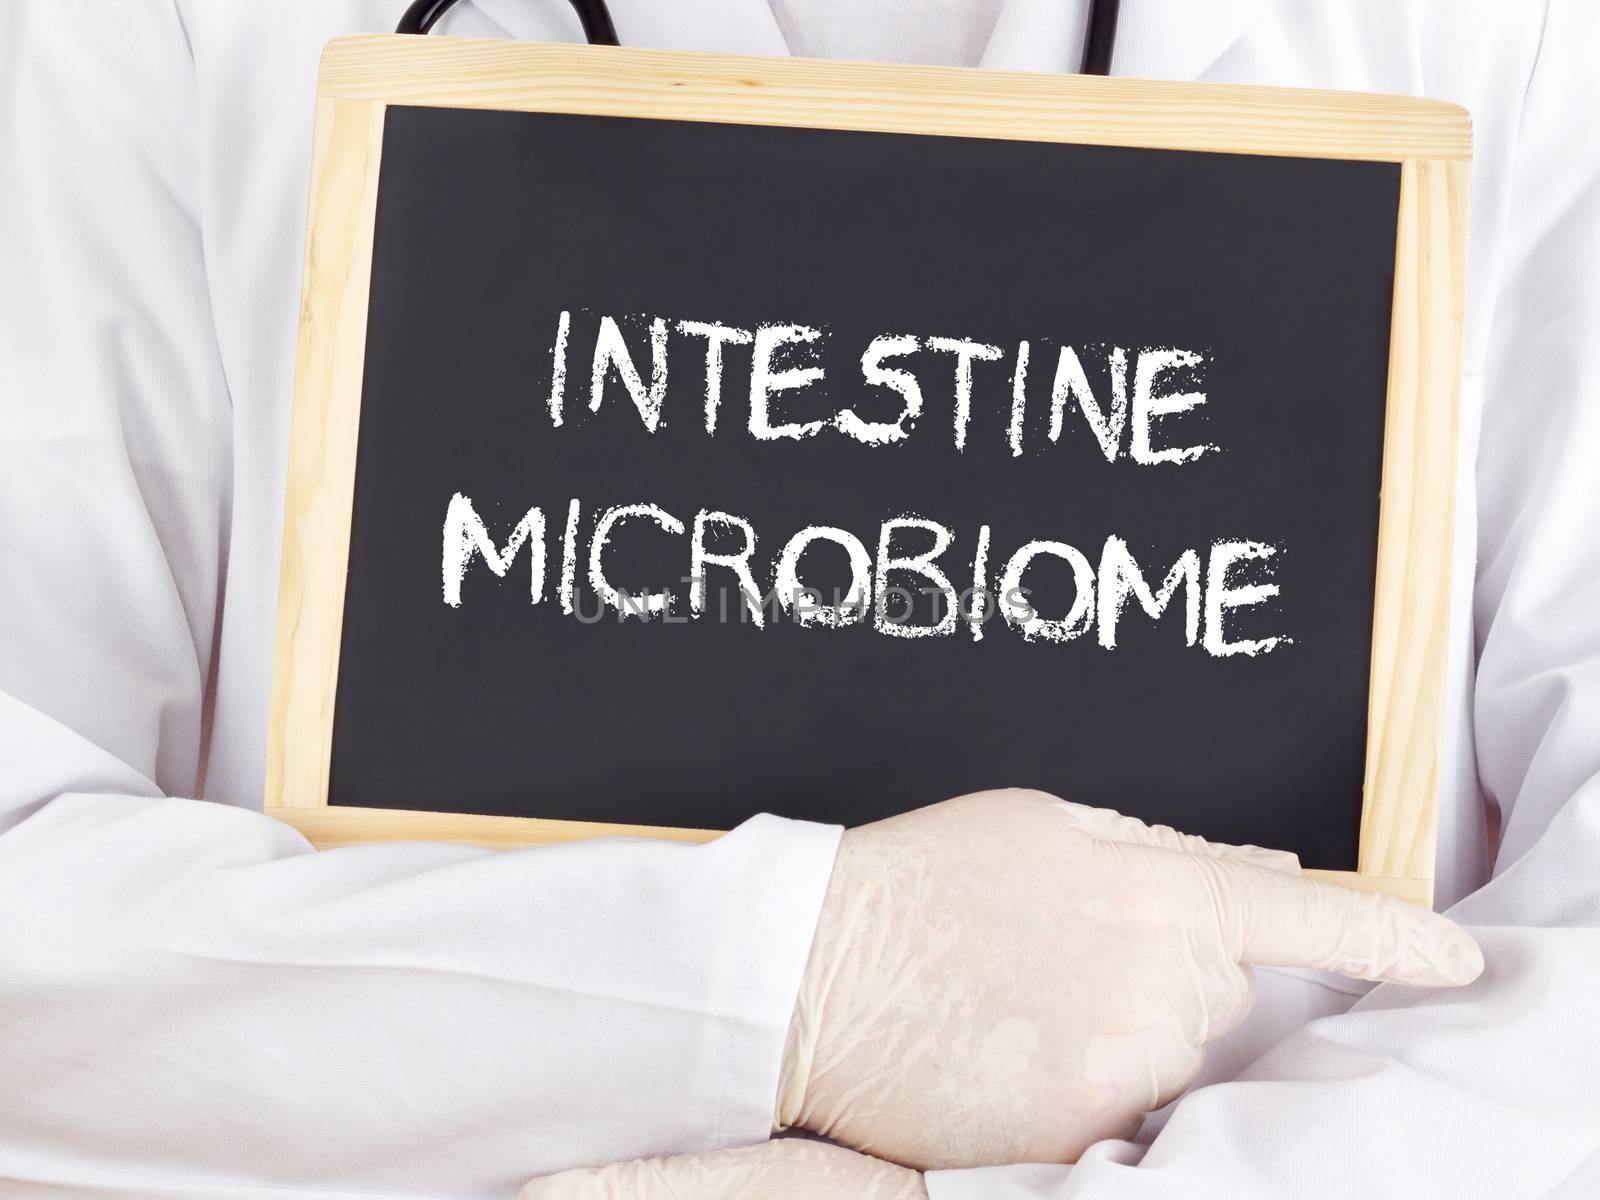 Doctor shows information: intestine microbiome